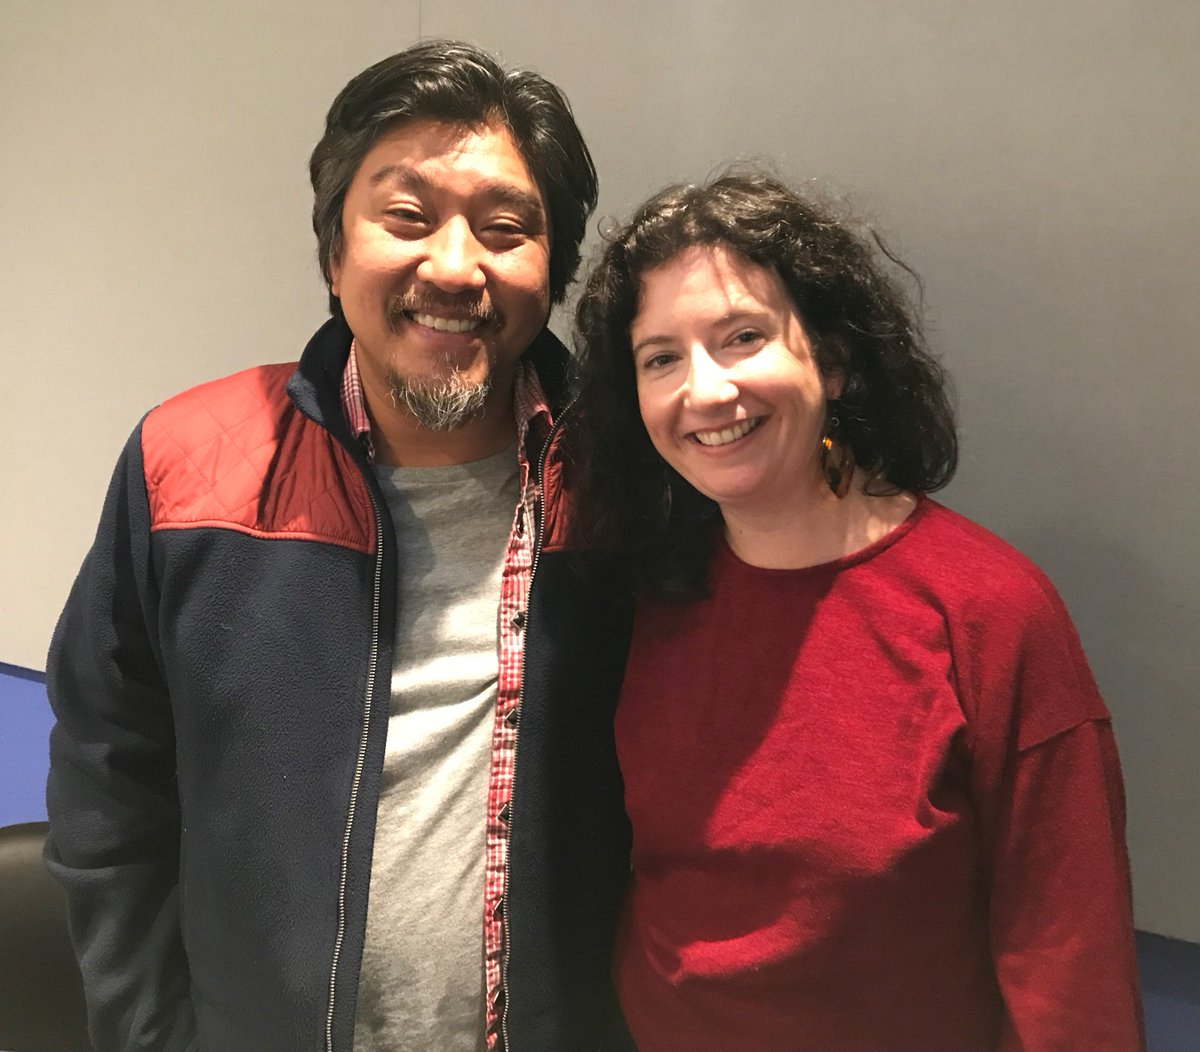 Stream/download the unexpurgated version of our @KBOO Between the Covers conversation between @chefedwardlee and @foodloverPDX on Edward's book #ButtermilkGraffiti: bit.ly/2B3fXOj #cooking #eating #recipes @MindOfAChef